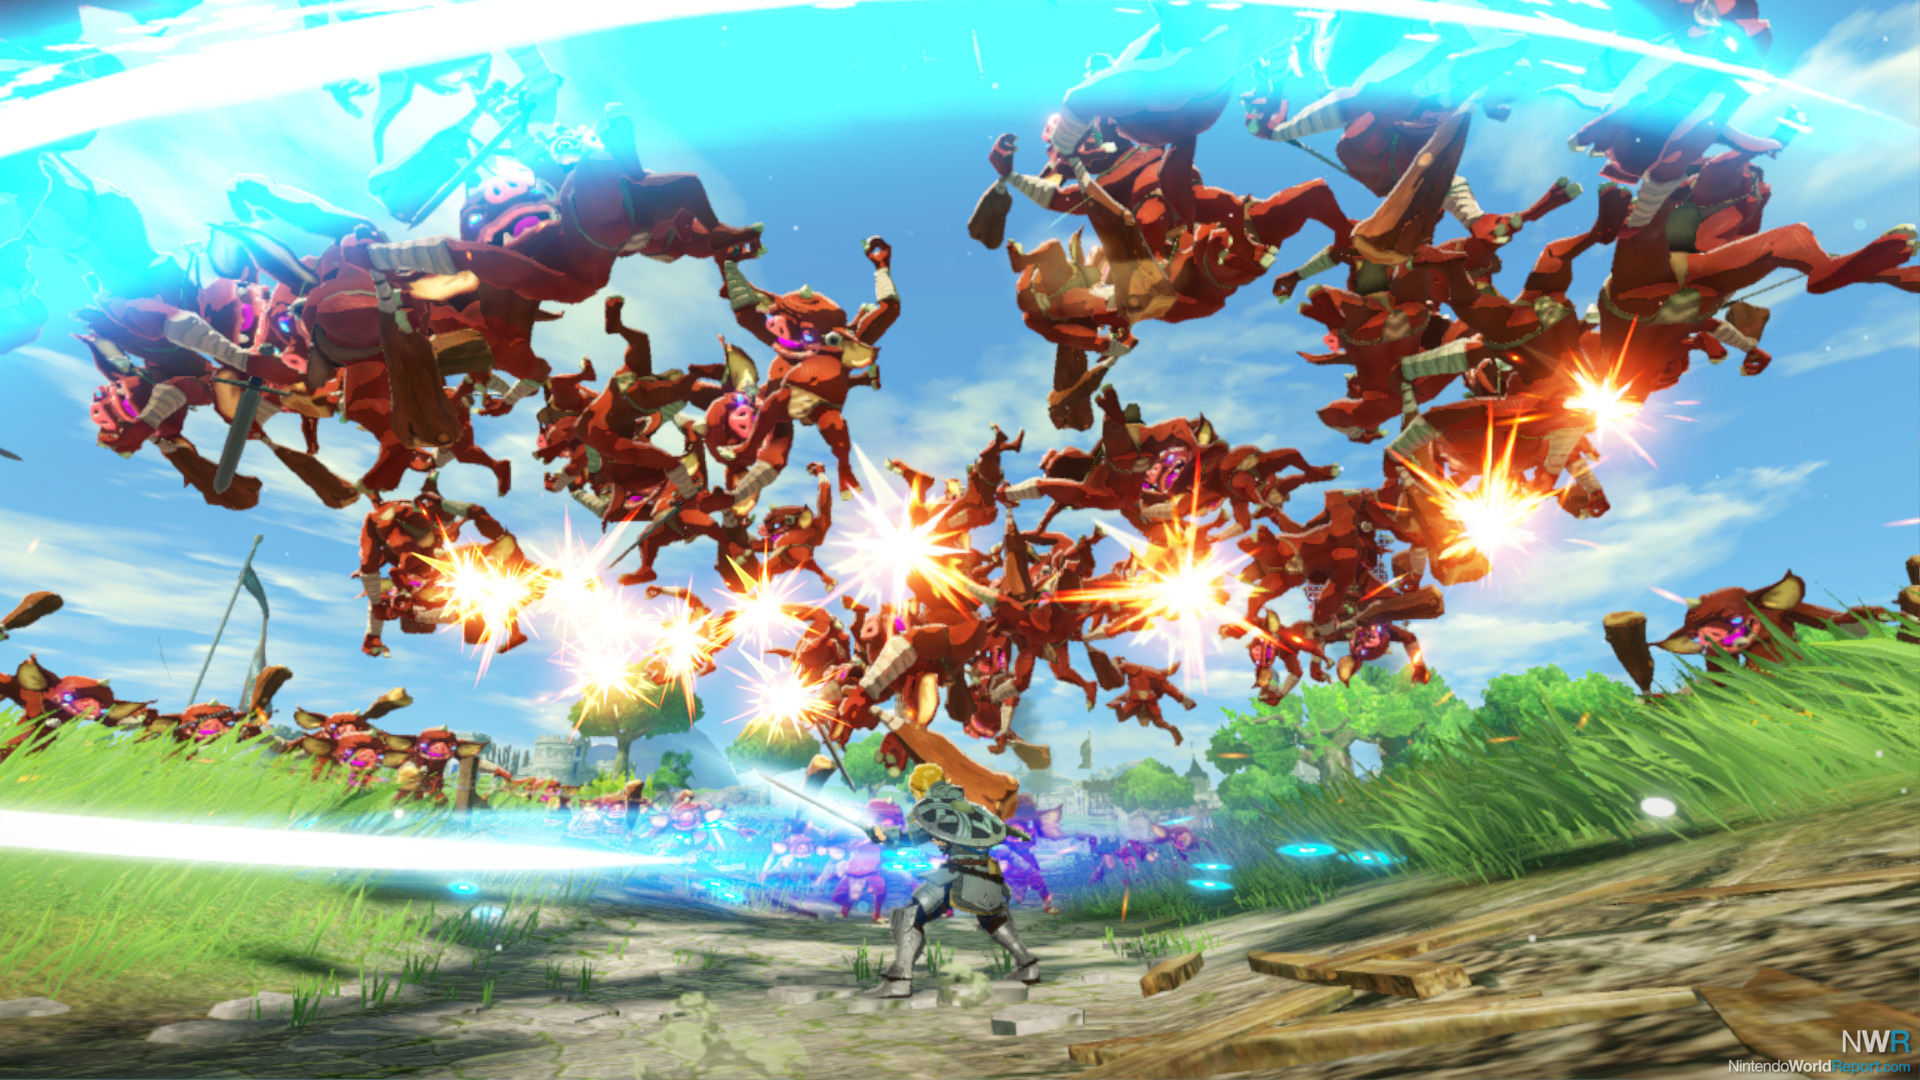 Hyrule Warriors Age of Calamity Gets a New Trailer and Gameplay - News -  Nintendo World Report